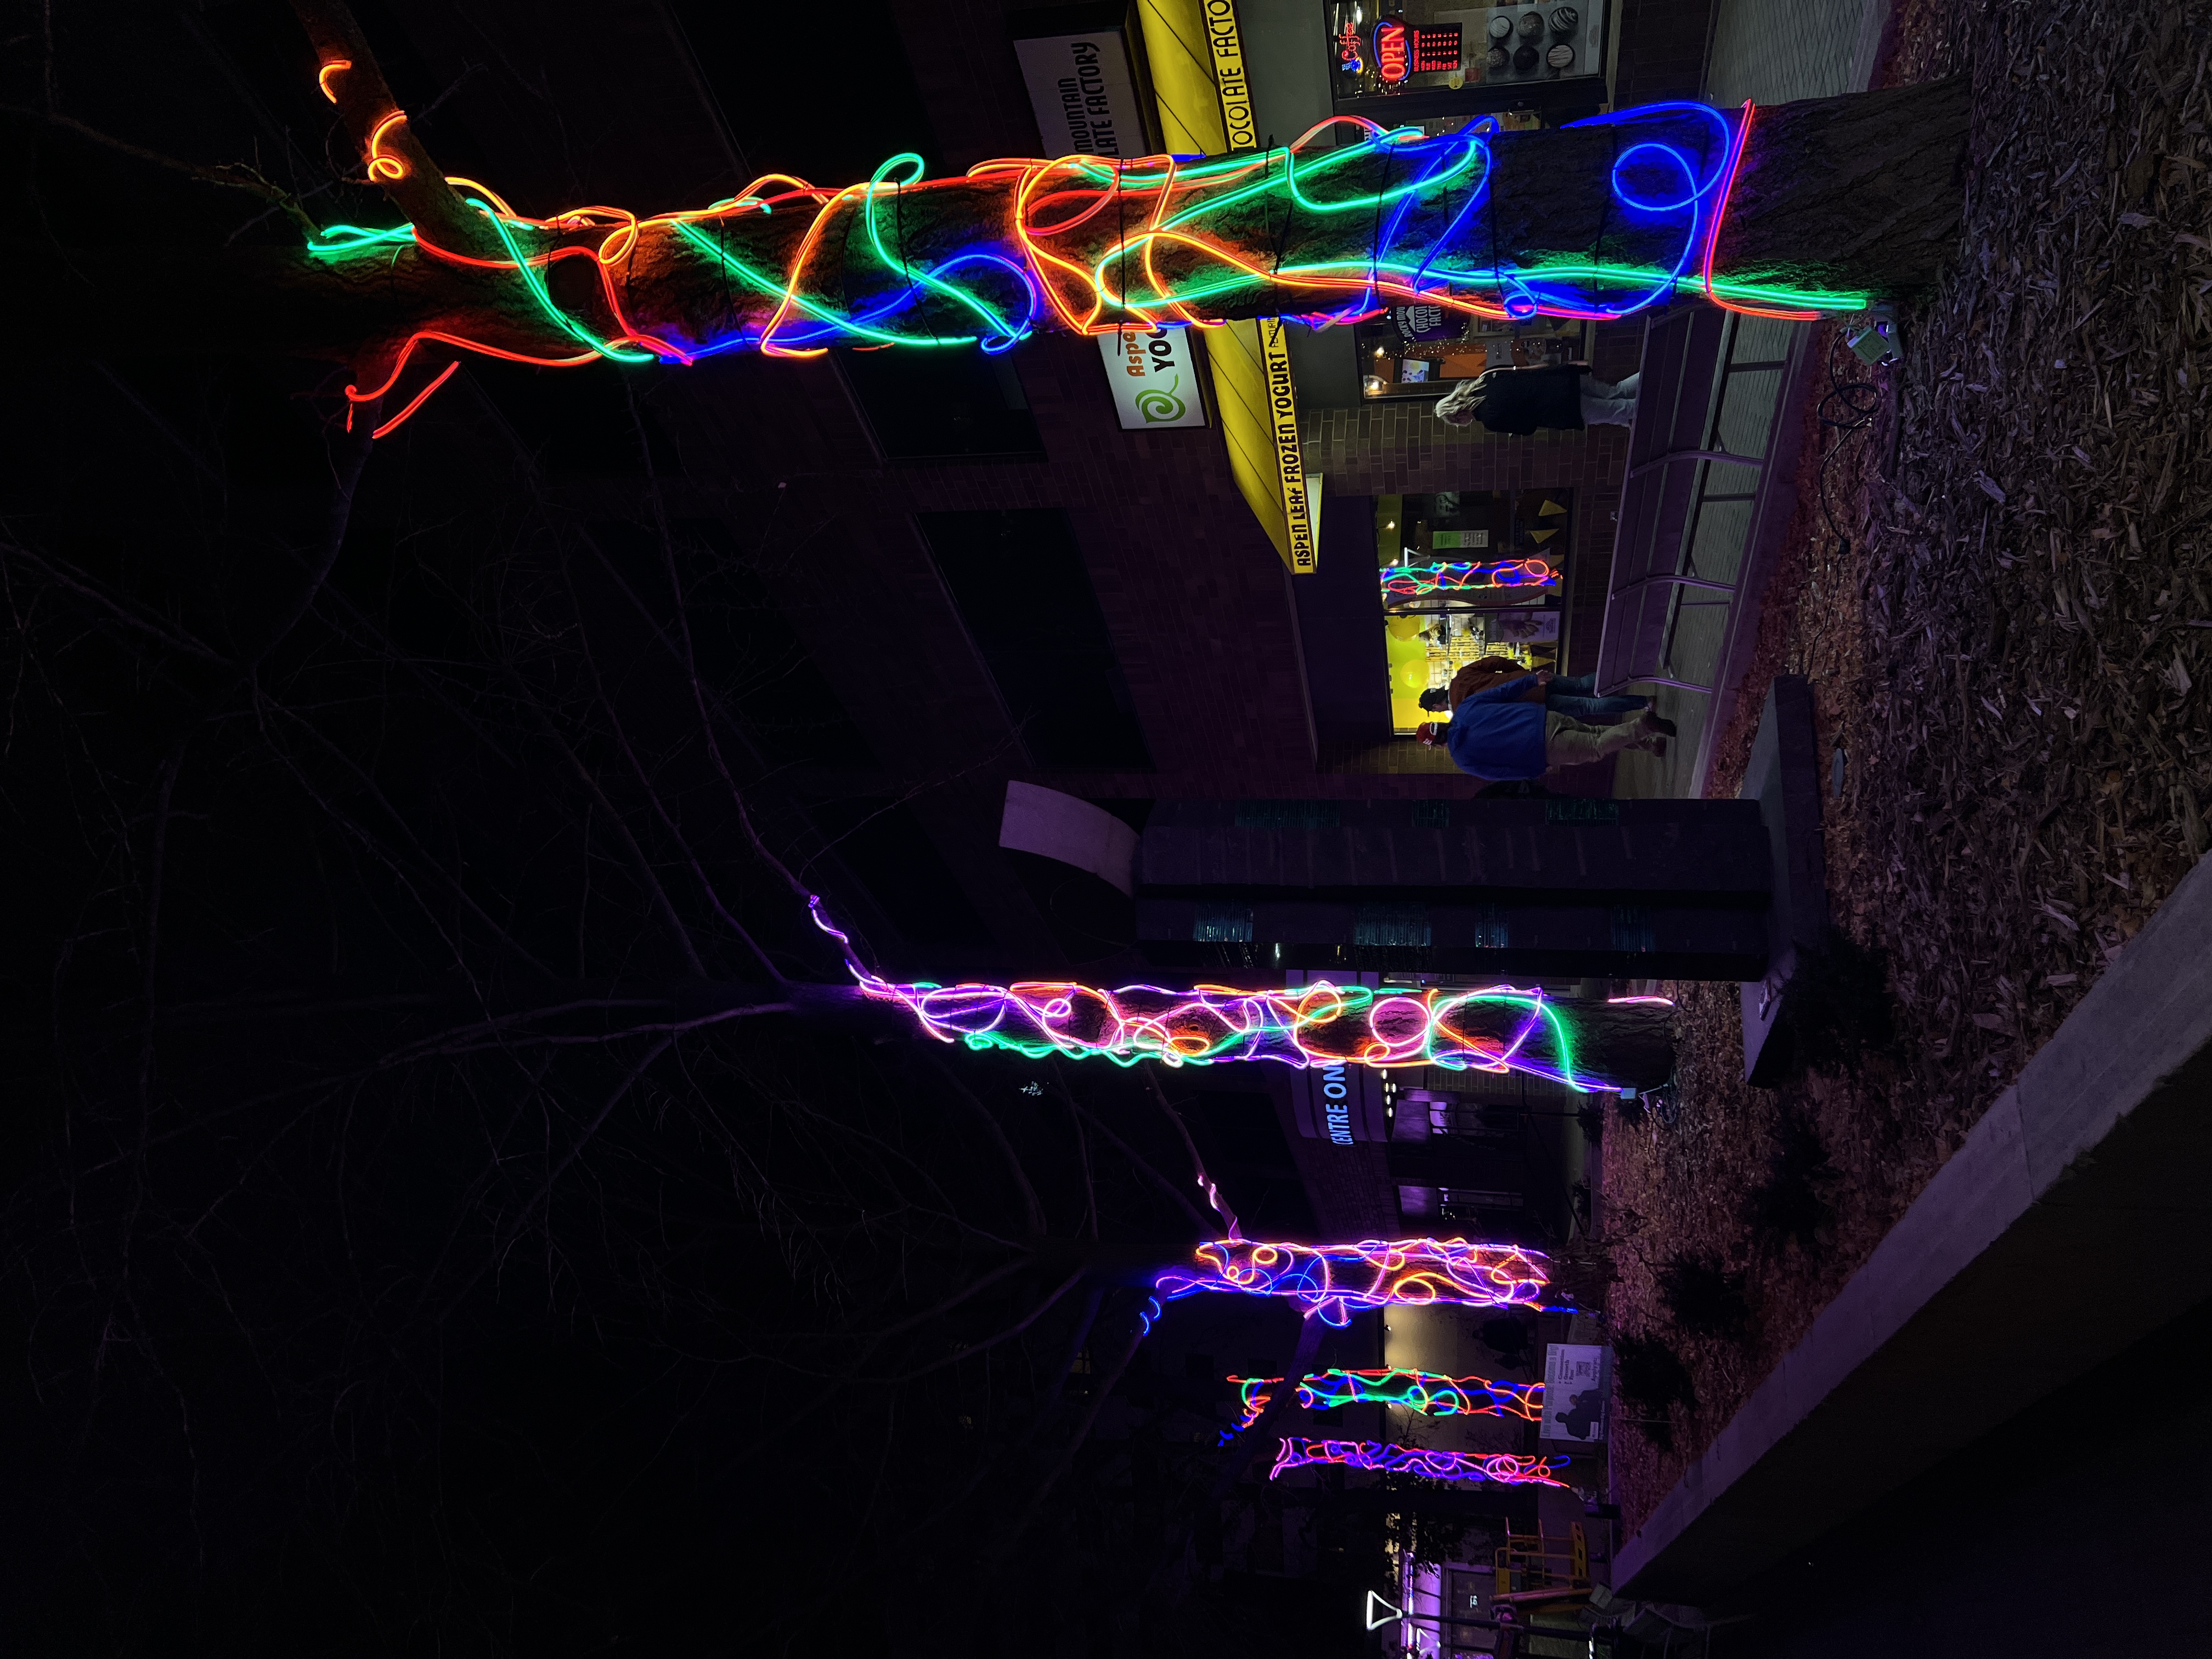 with “Scribble Tree” light installation in downtown Iowa City